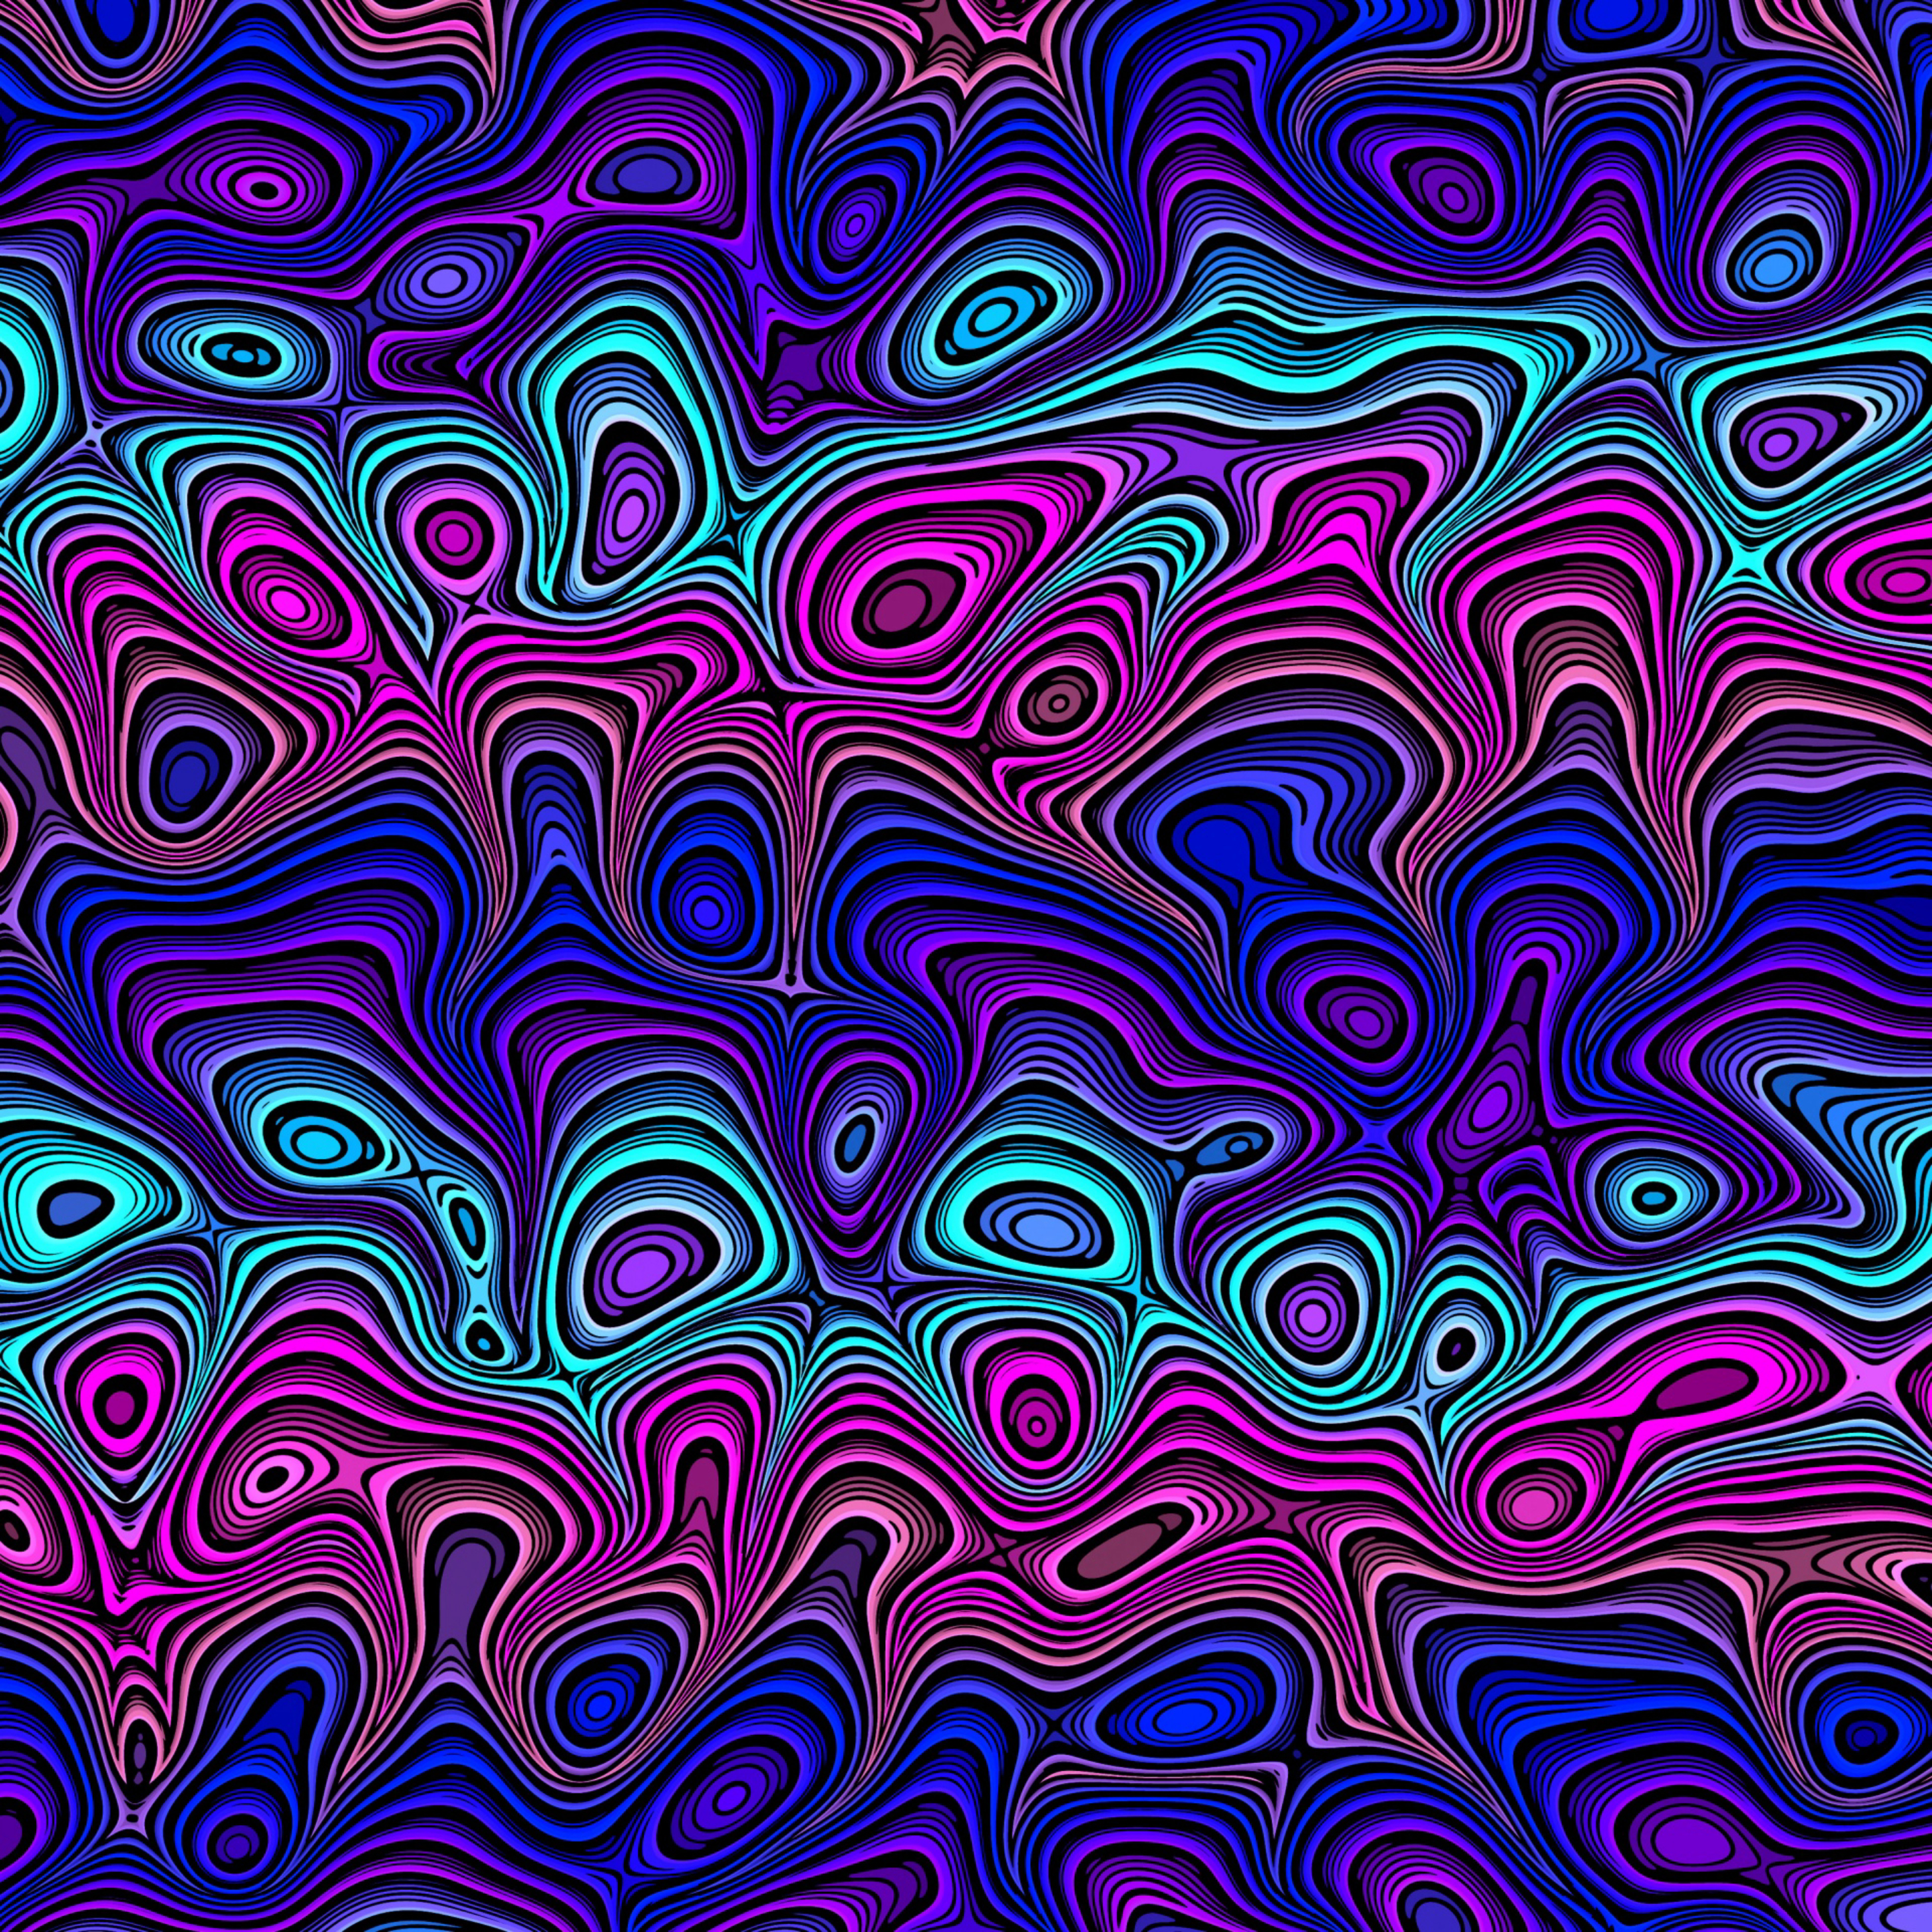 wavy, motley, involute, lines, multicolored, abstract, swirling